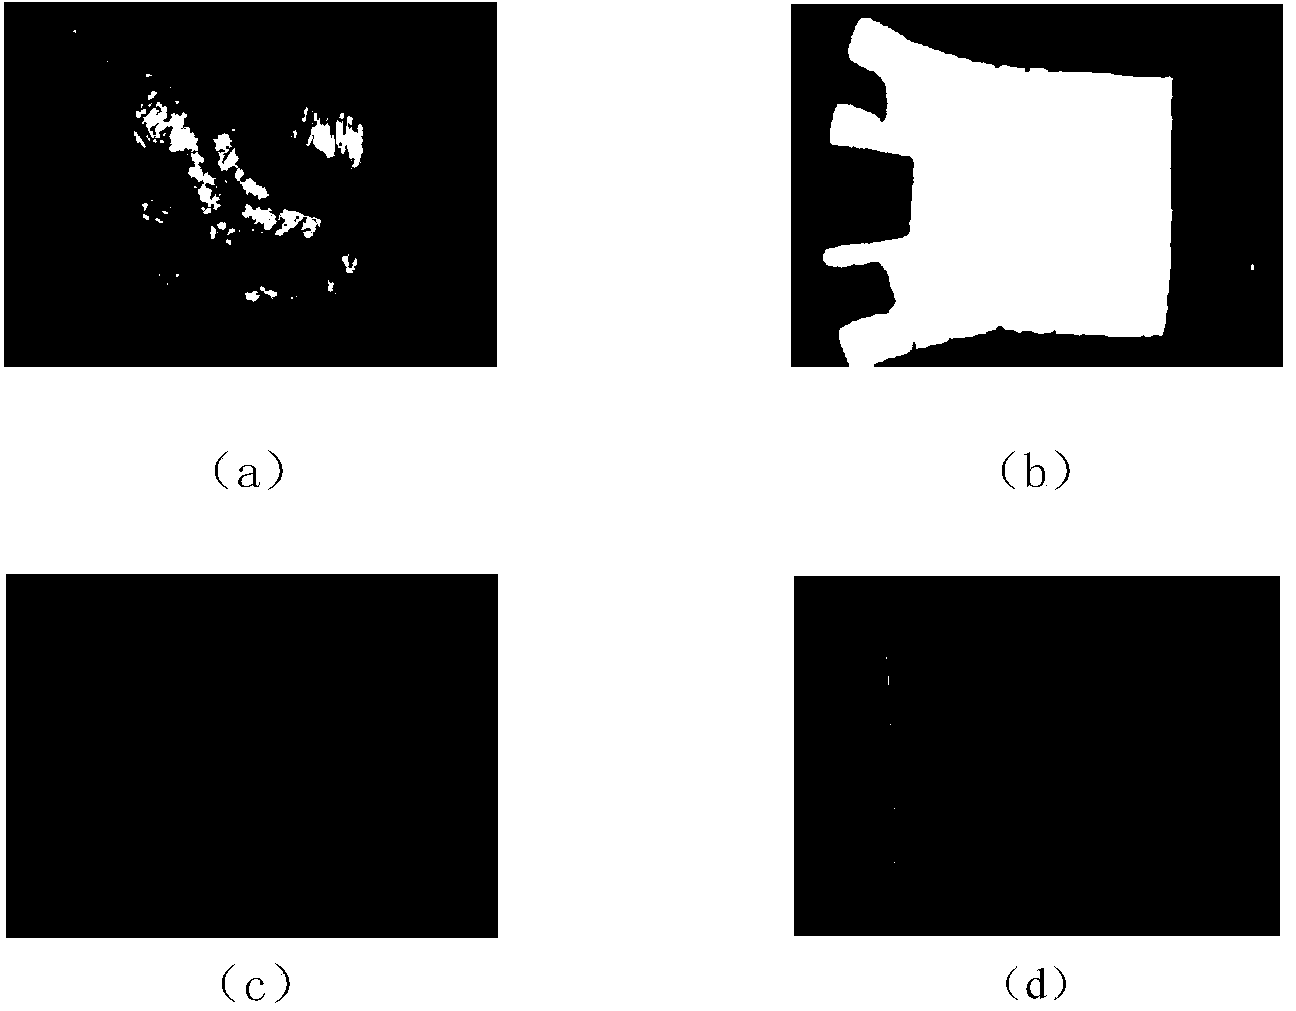 Palm print recognition method based on cross gradient encoding of image with stable characteristics